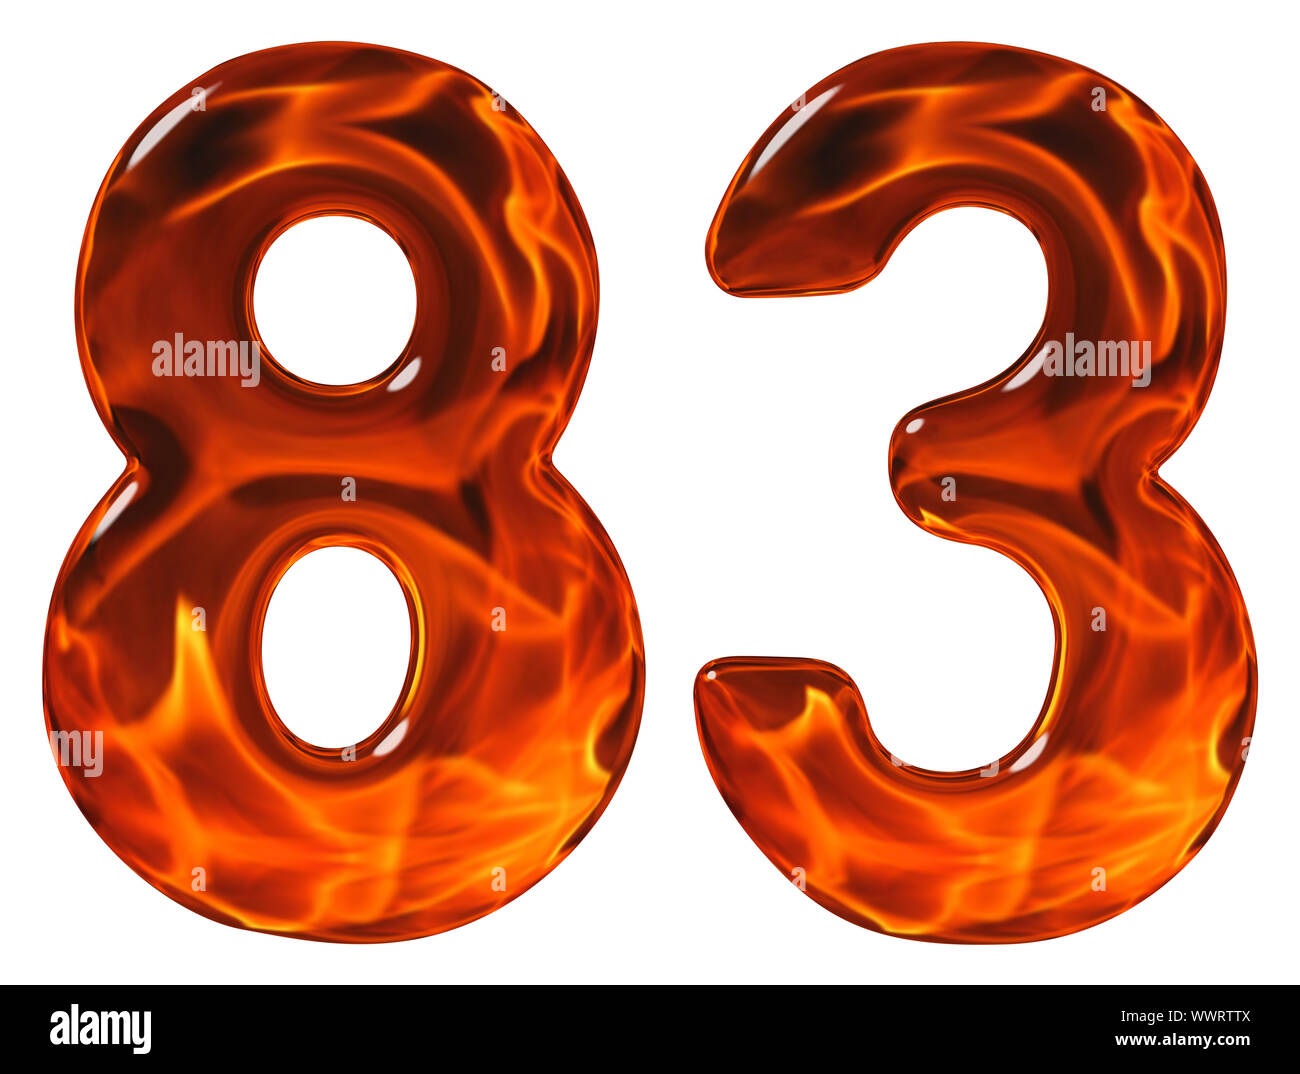 83, eighty three, numeral, imitation glass and a blazing fire, isolated on white background Stock Photo